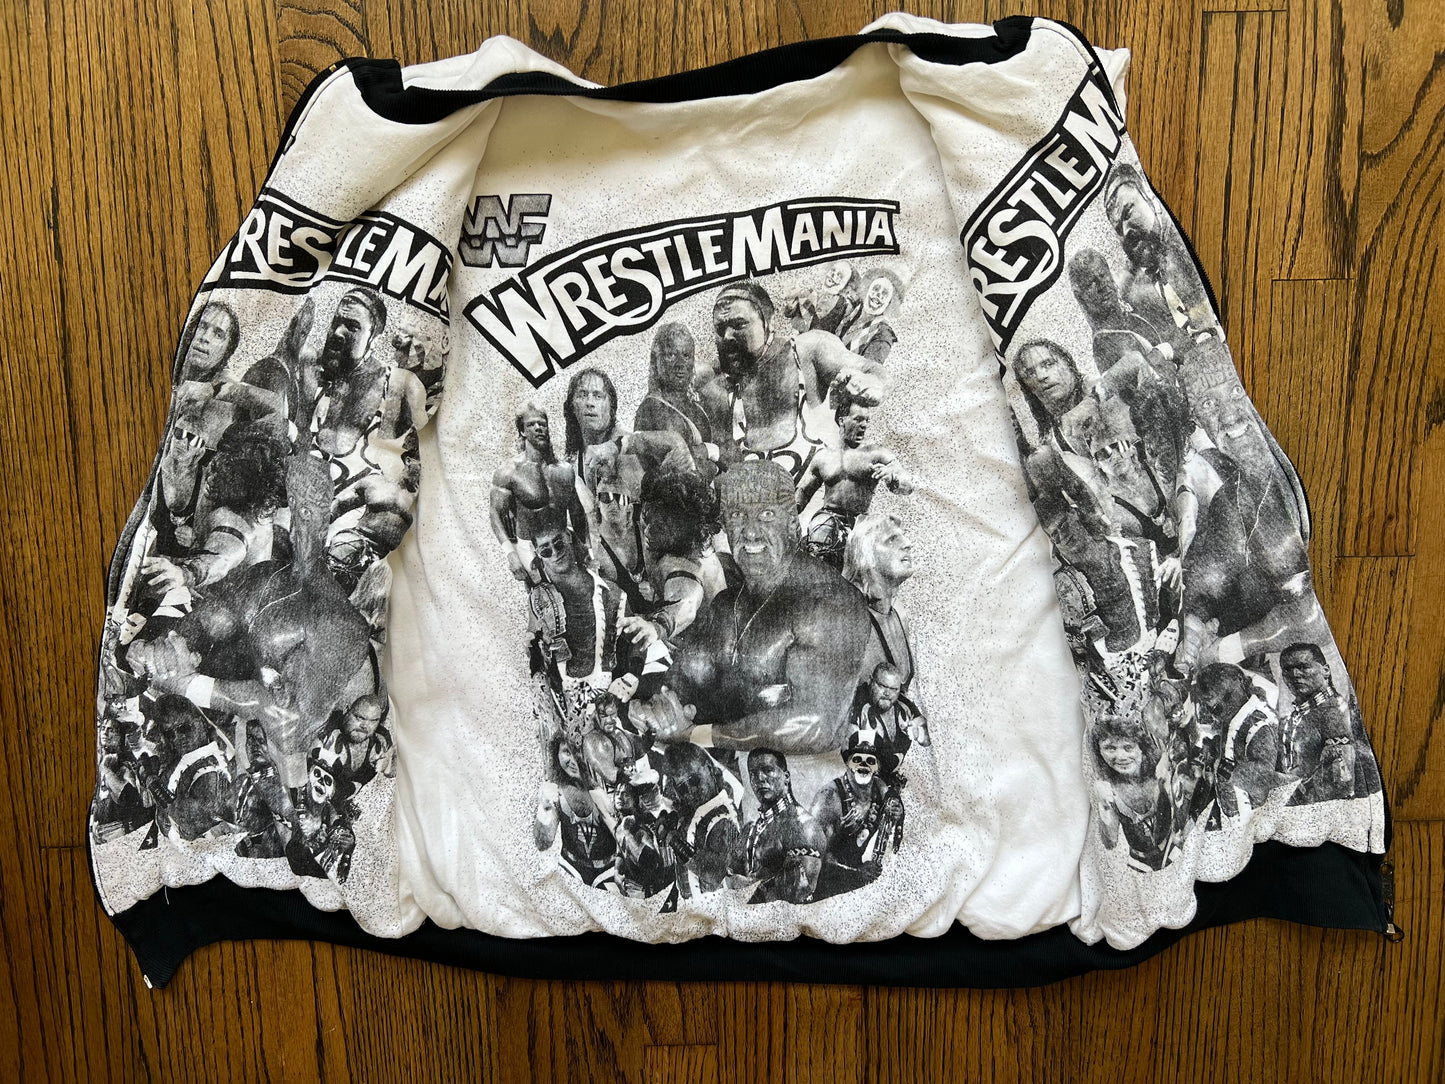 1994 WWF “Wrestlemania” inside and out print vest